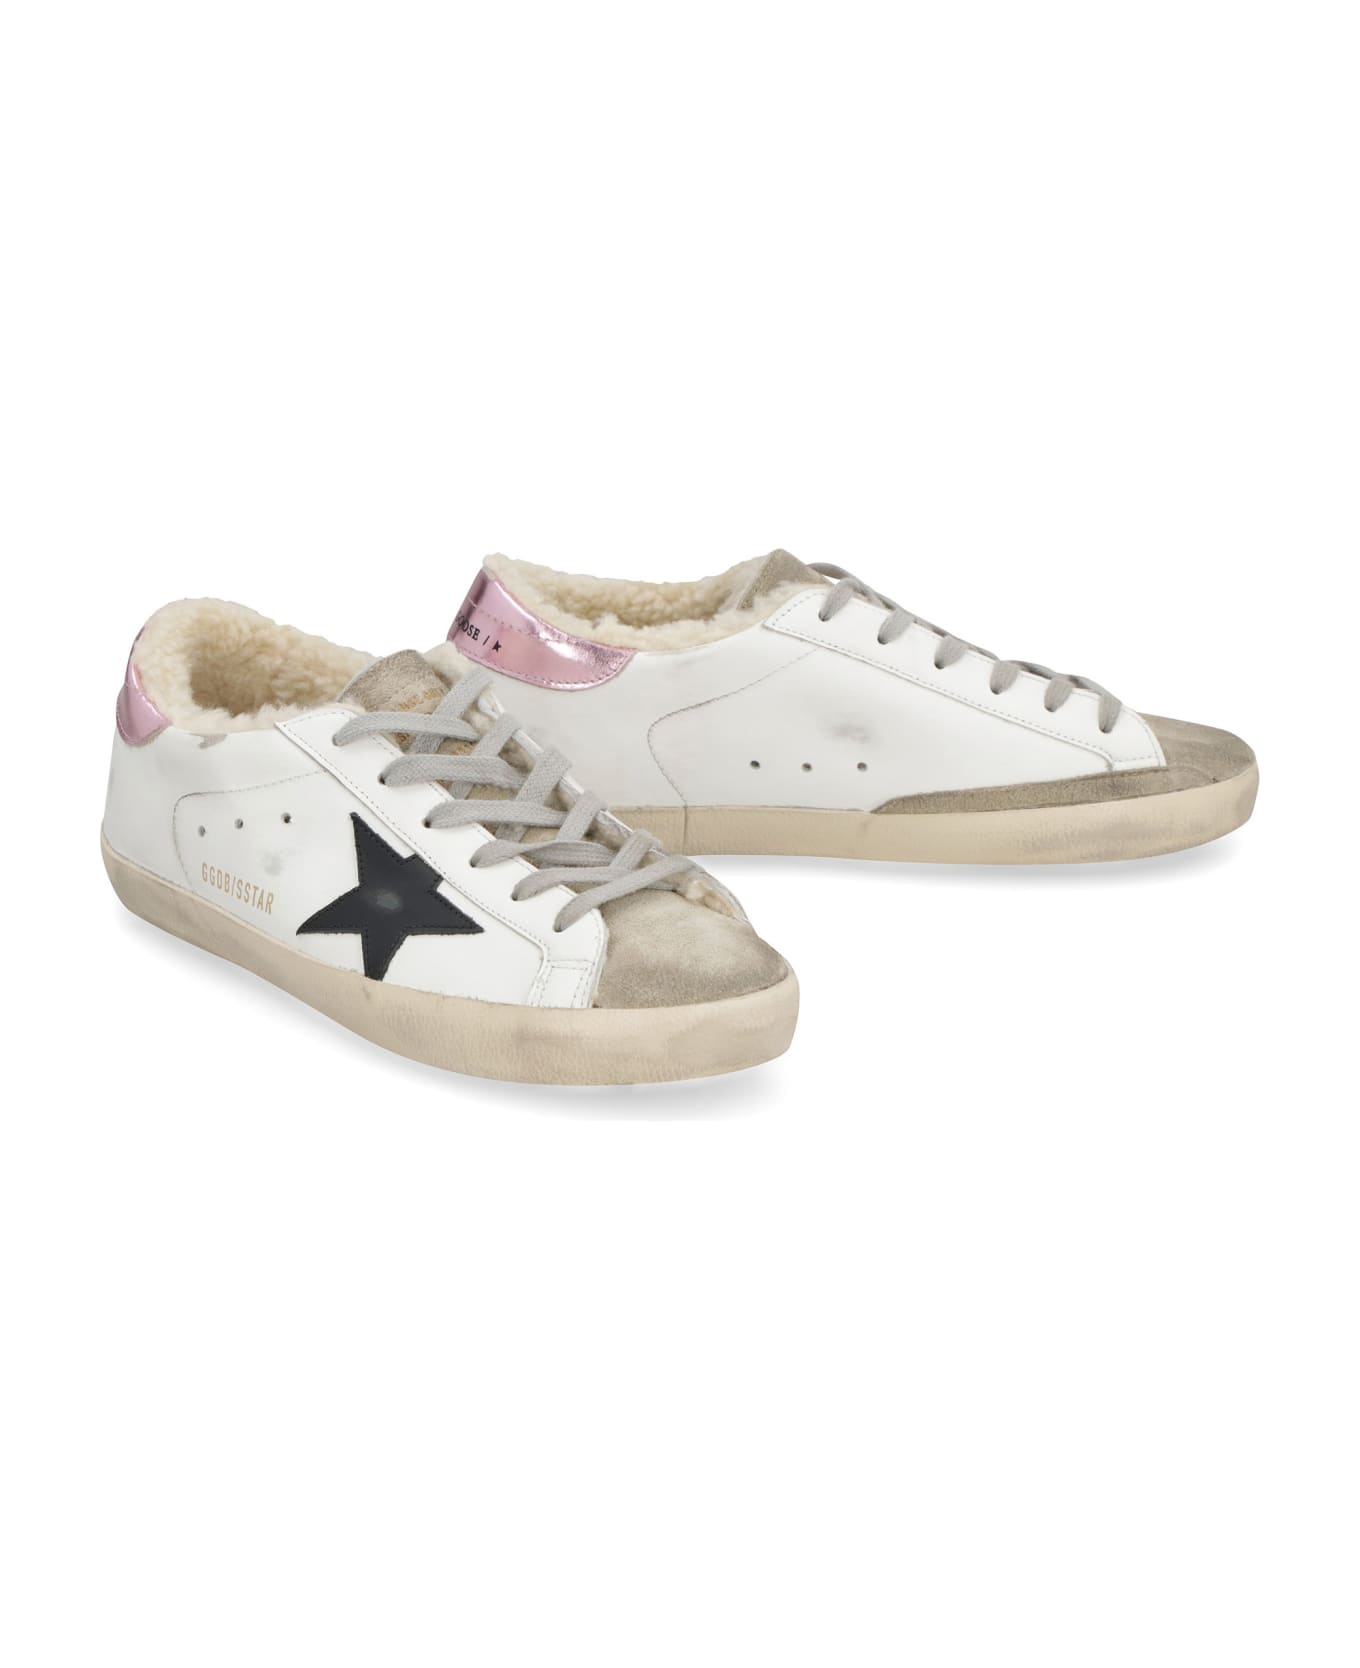 Golden Goose Super-star Leather Sneakers - White/ice/black/pink スニーカー